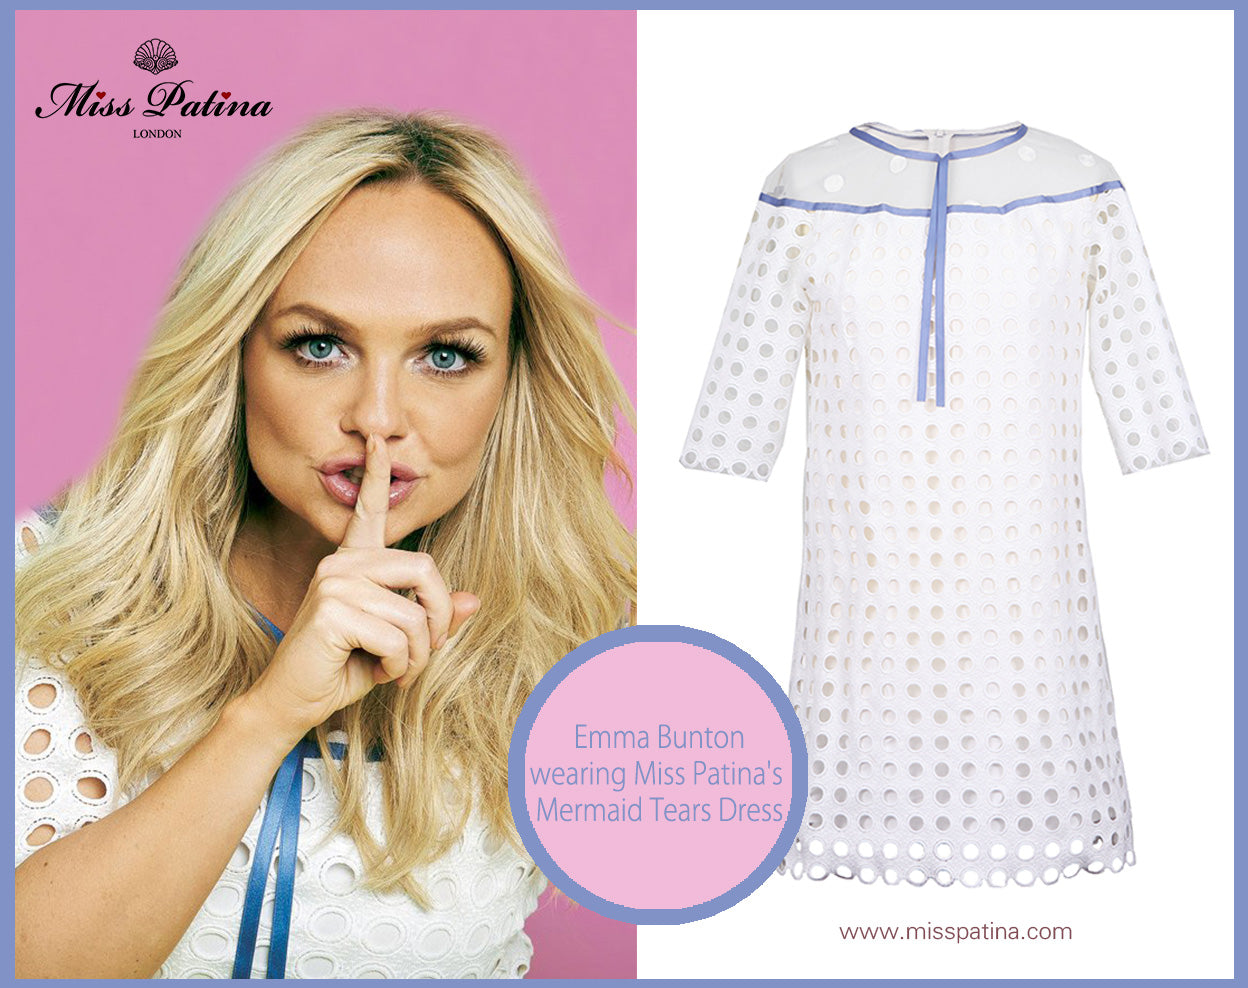 Spotted:Emma Bunton in Miss Patina!